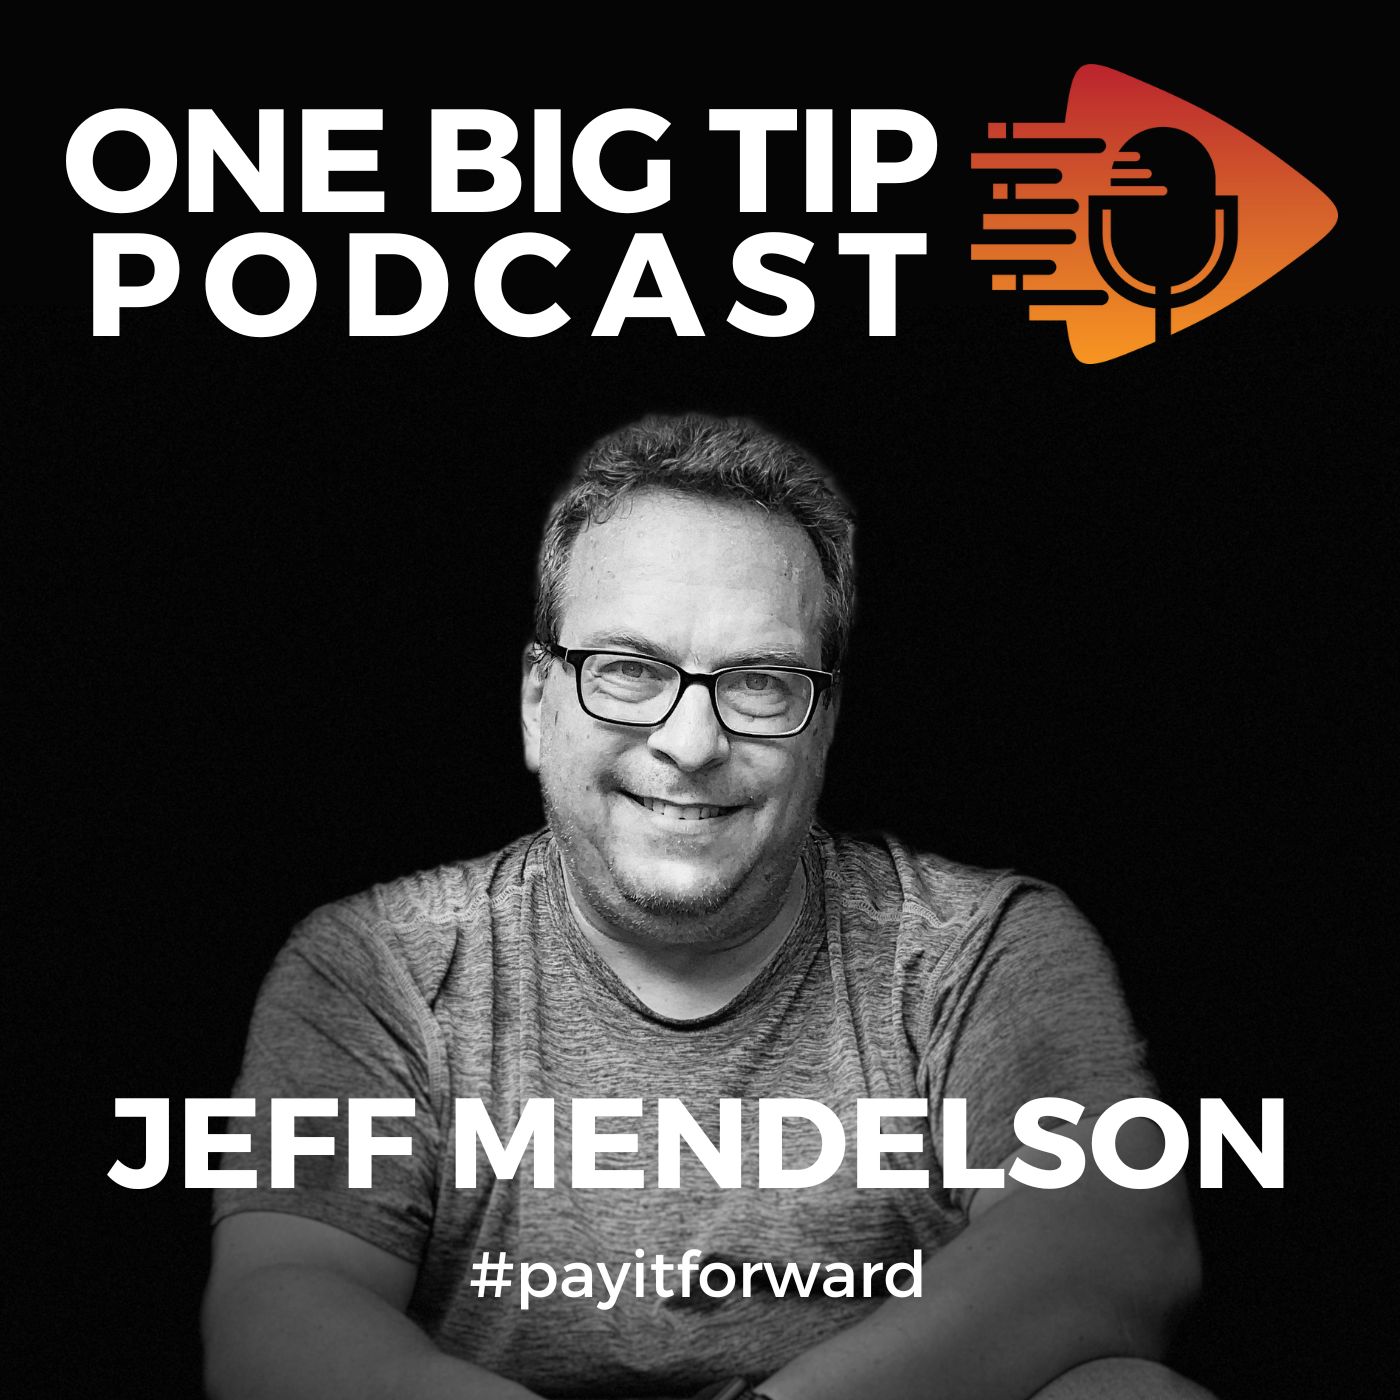 THE ONE BIG TIP PODCAST – BE A GUEST – NEW